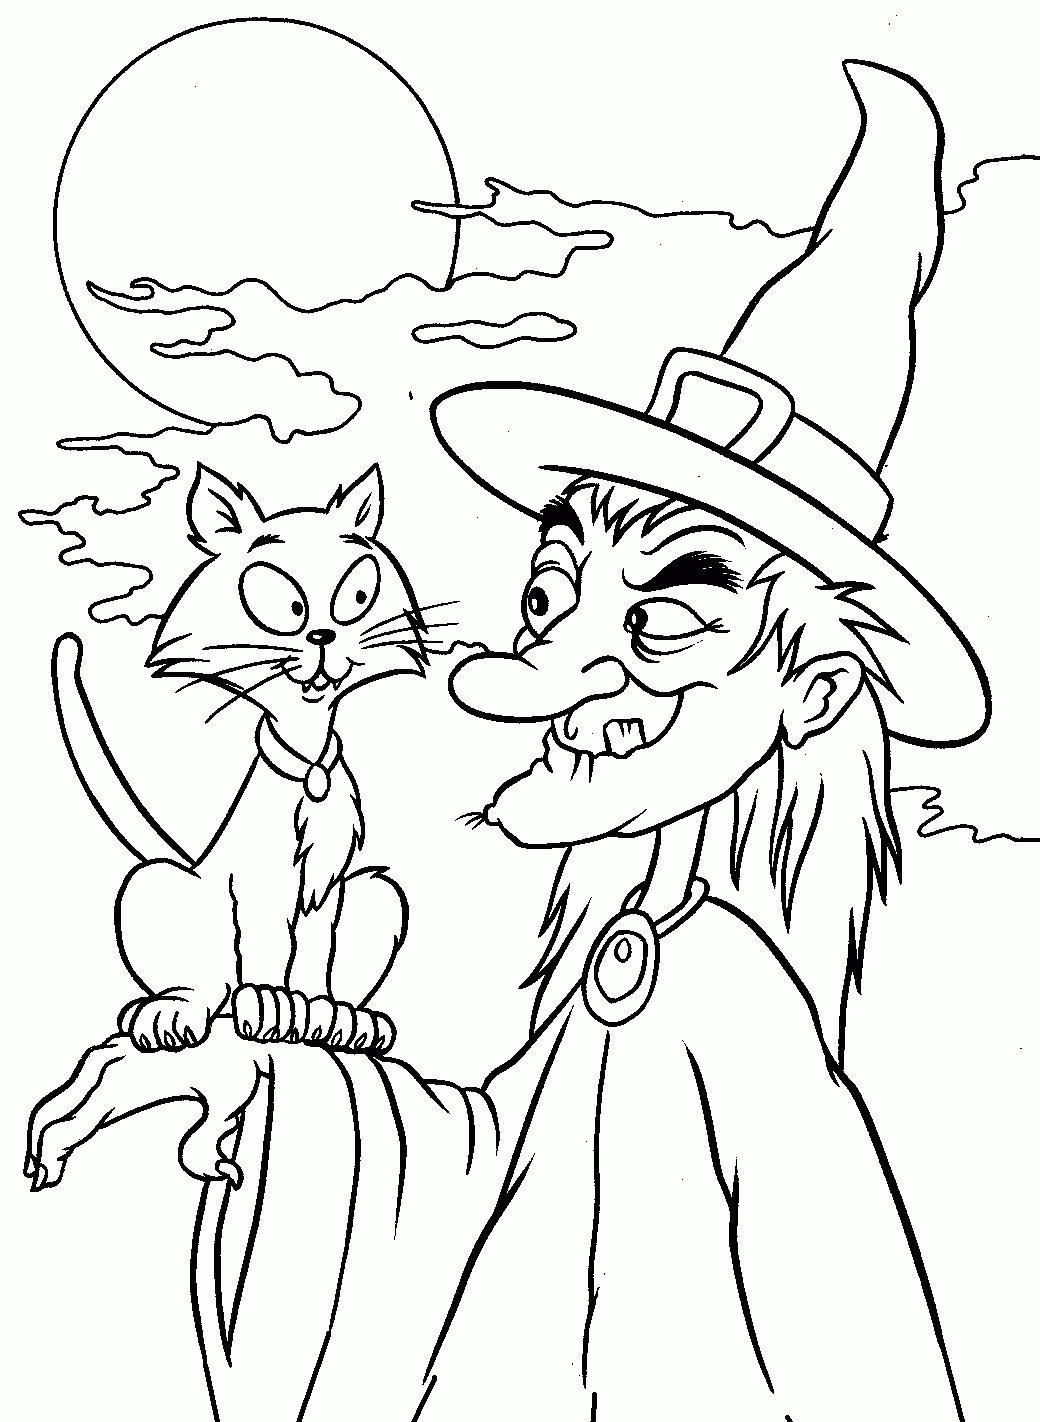 Halloween Coloring Pages Print Out Witch And Cat | Hallowen ...